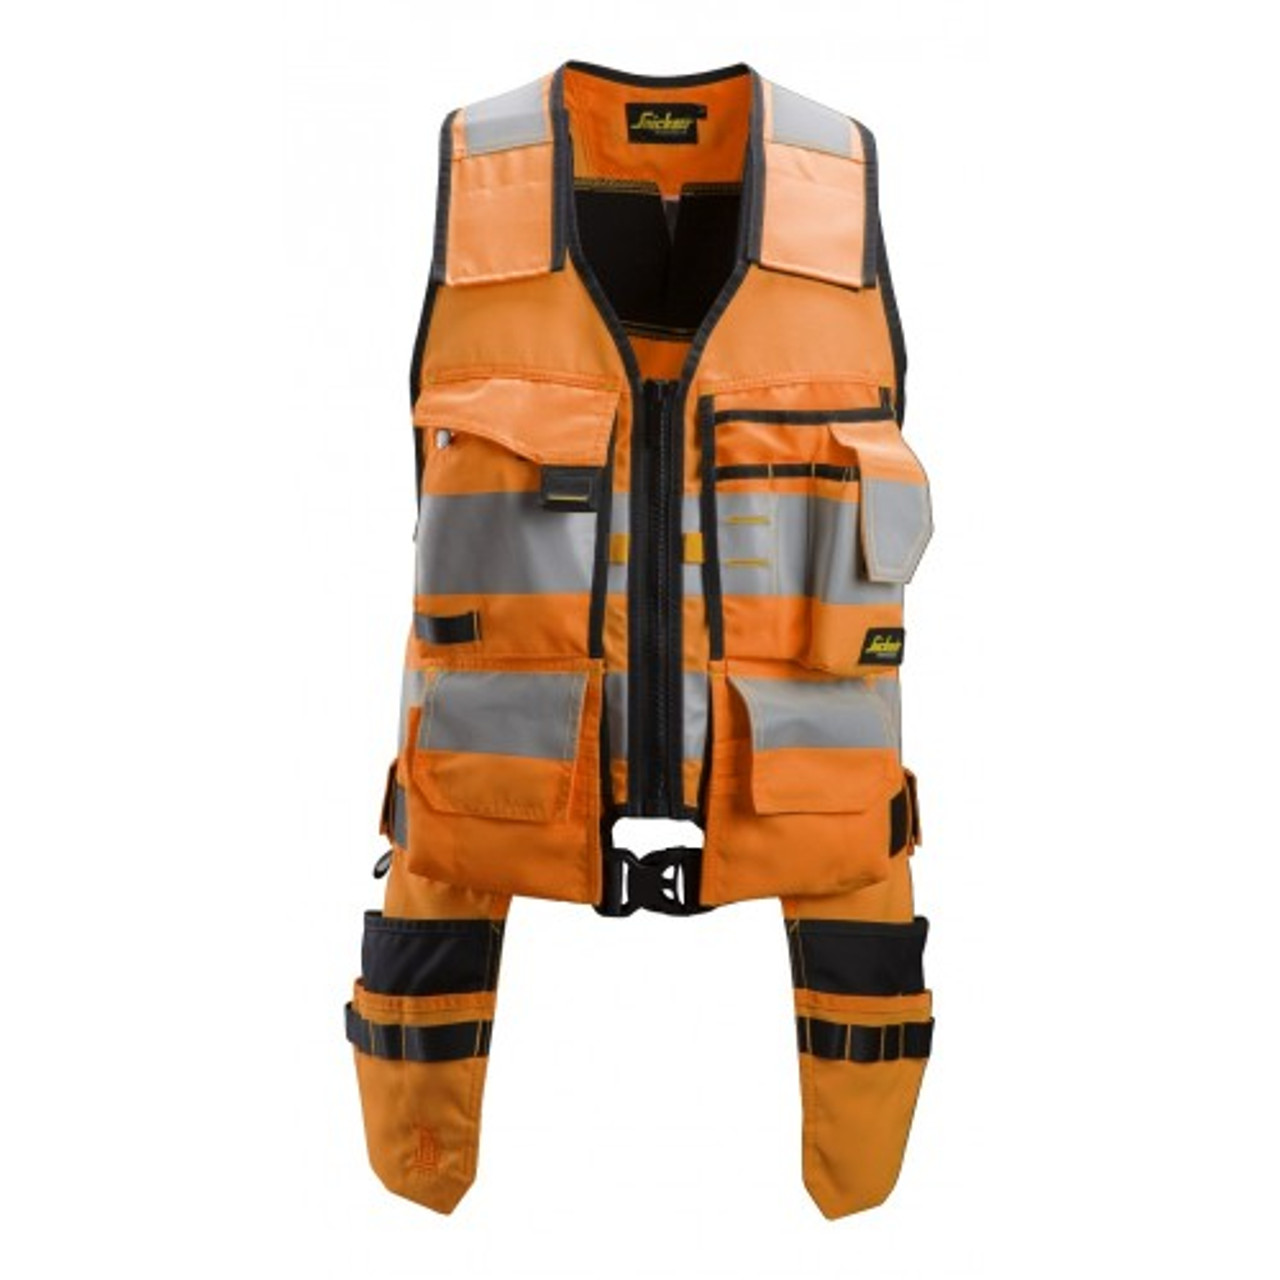 Buy online in Australia and New Zealand SNICKERS Tool Vest  4230 with  for Electricians that have Reflective Tape